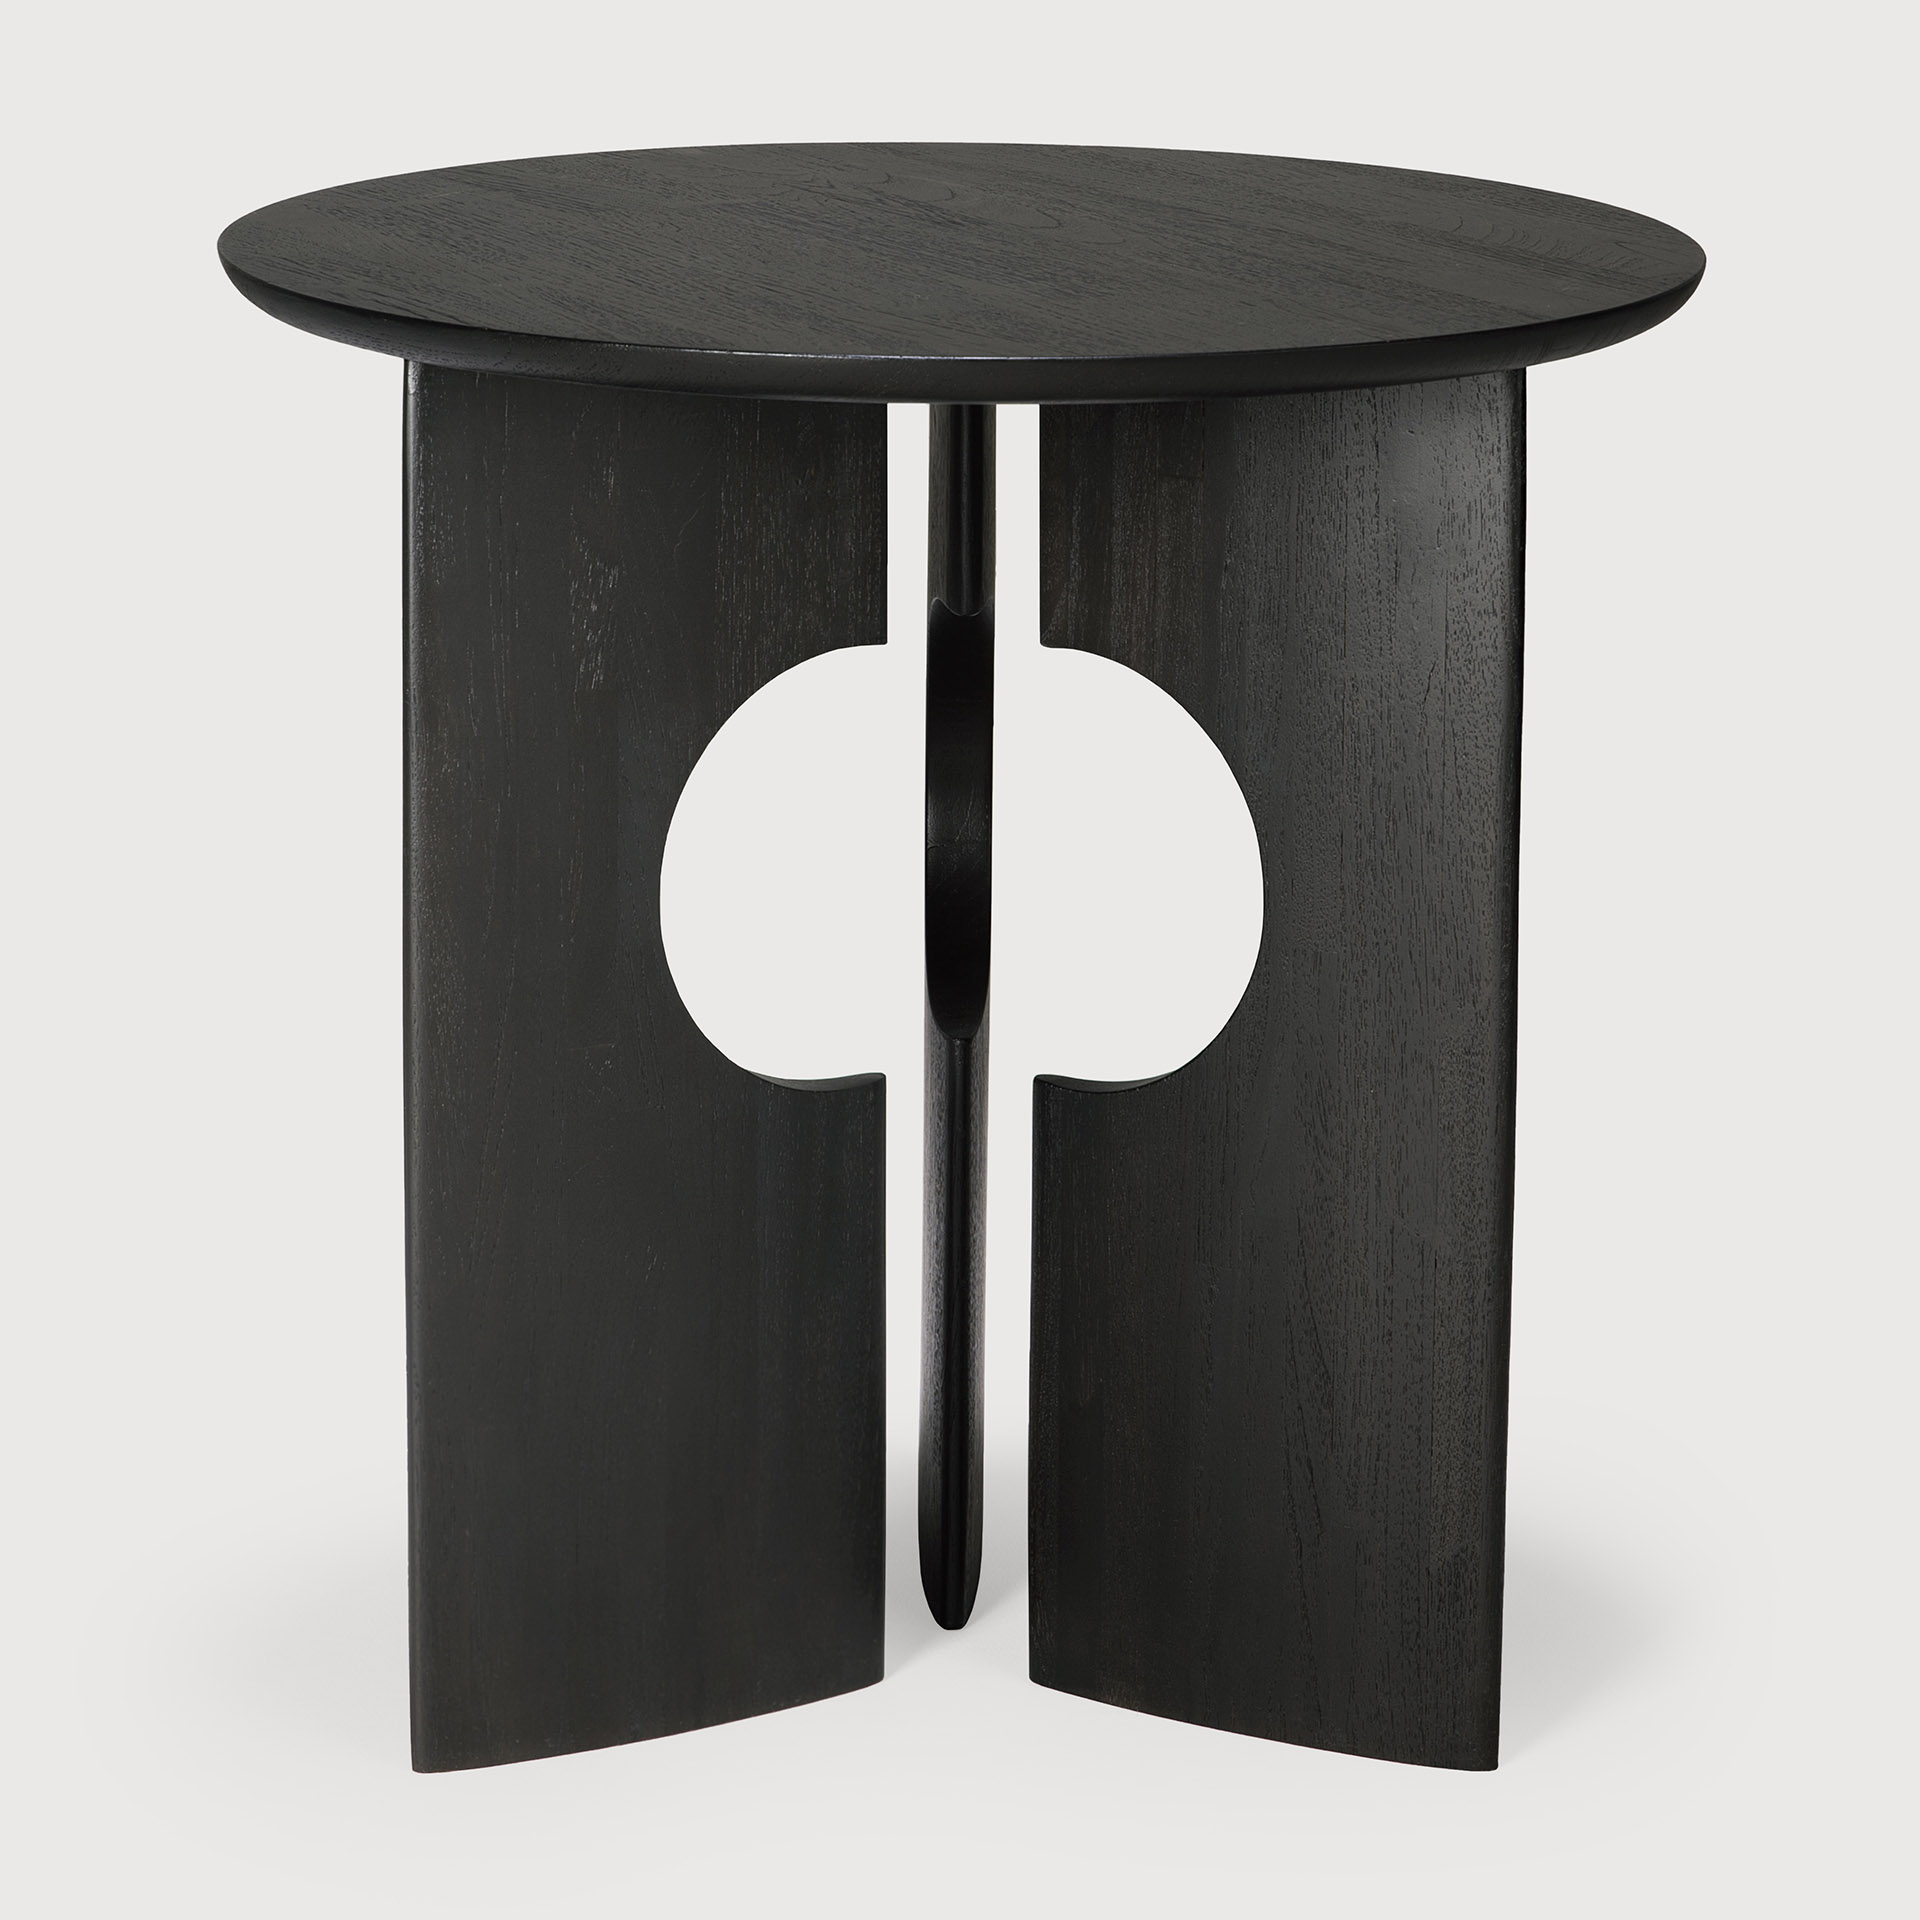 [10190*] Cove side table